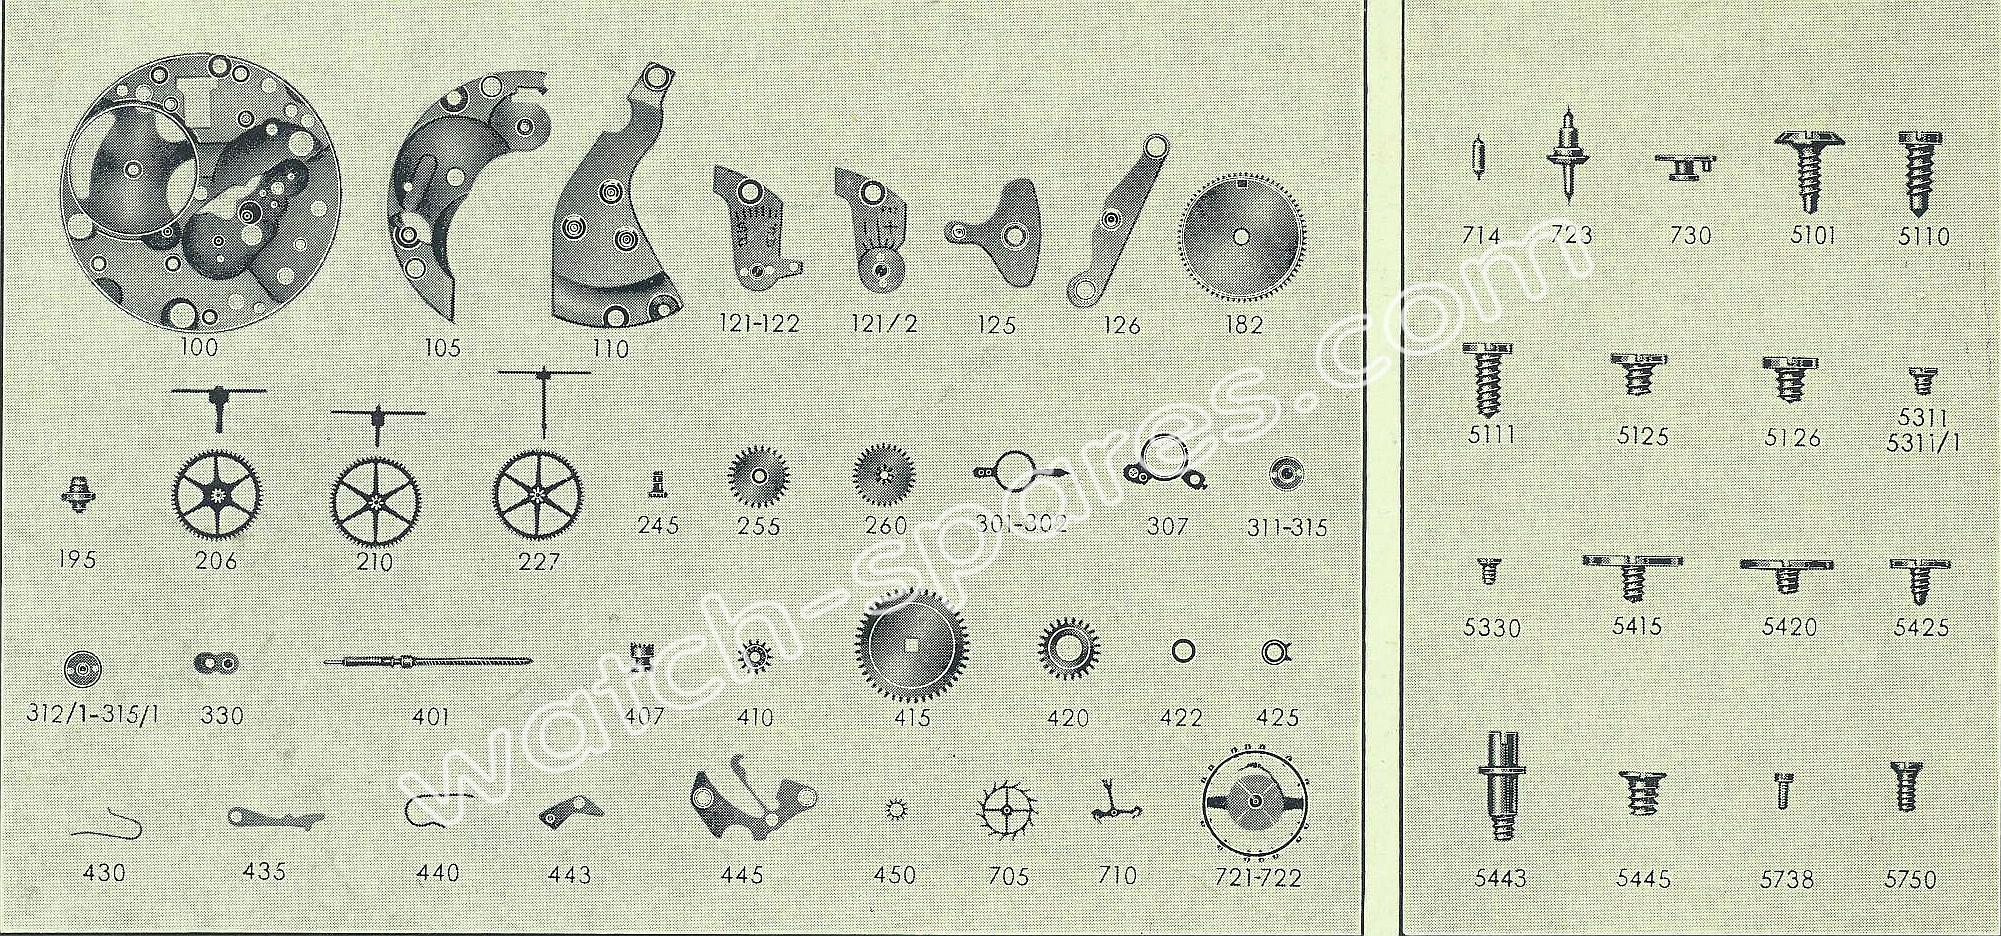 FHF Font 28 watch spare parts